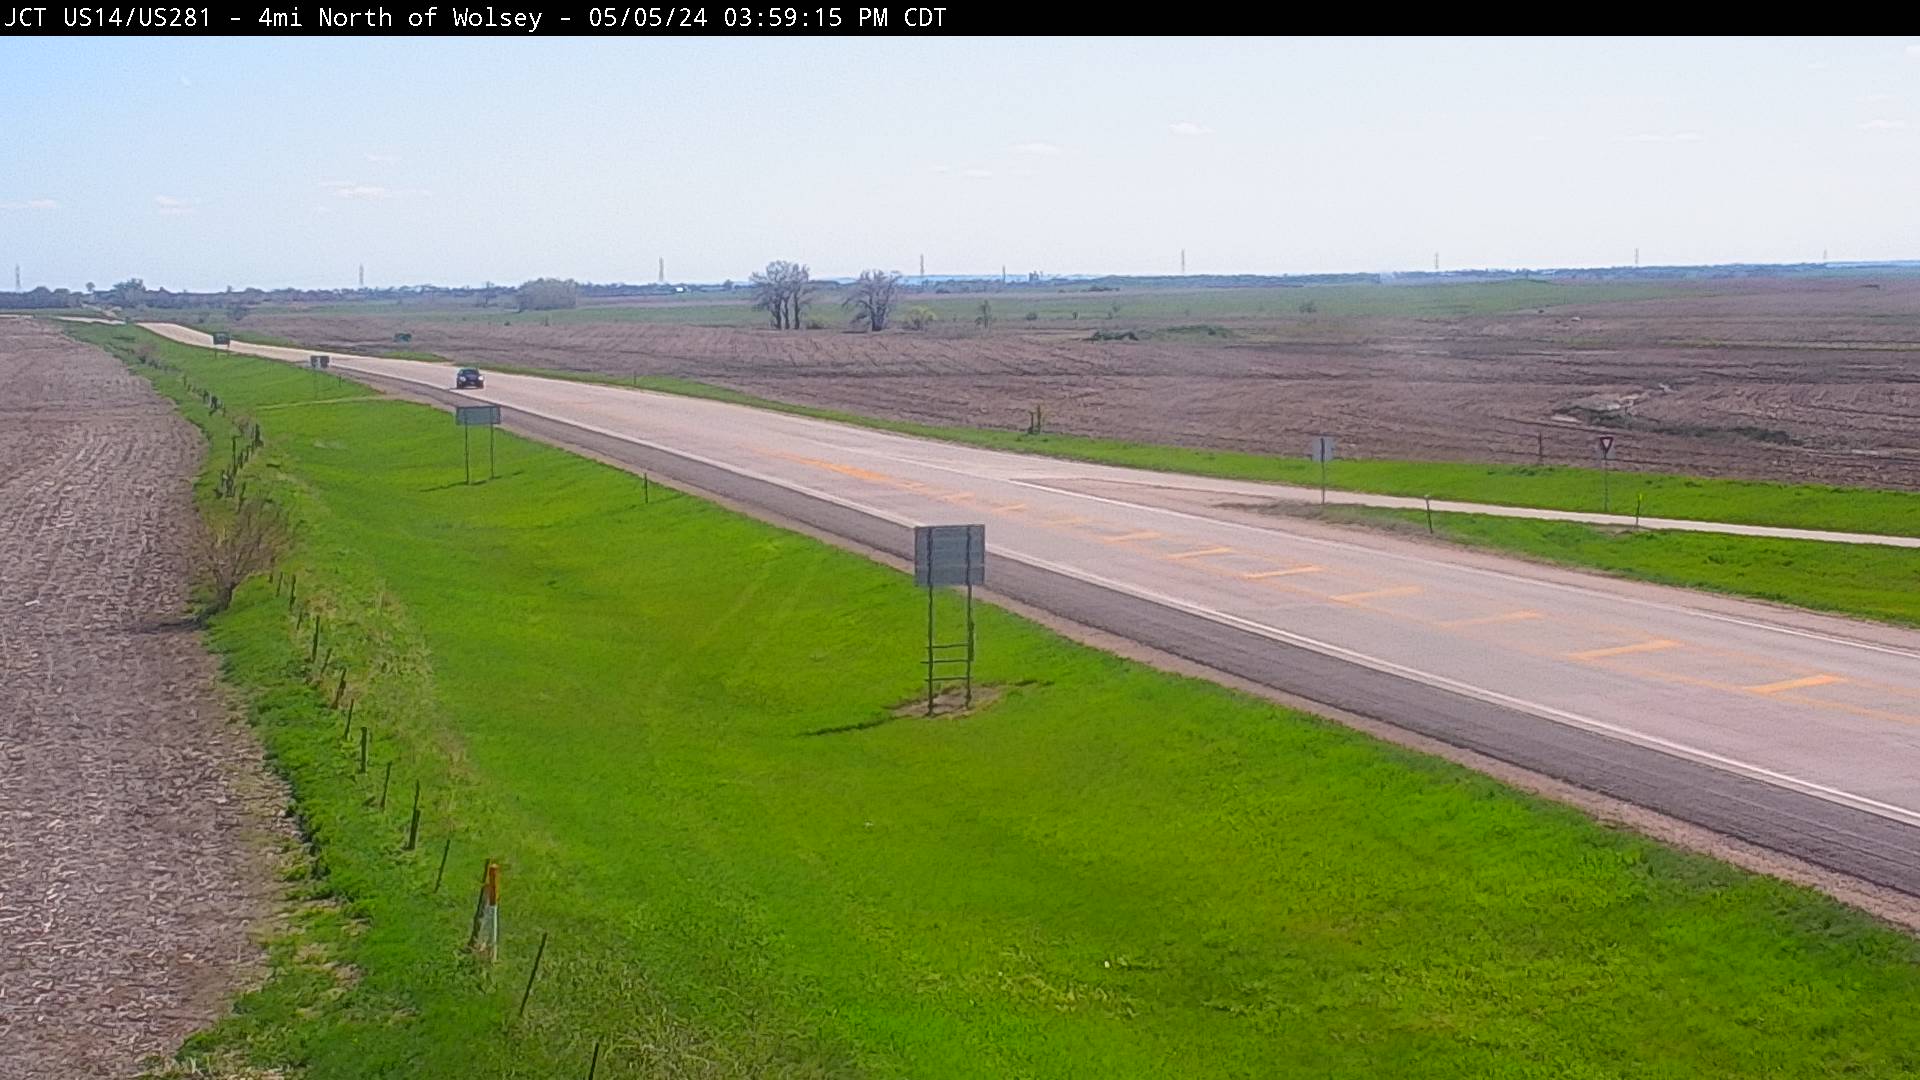 Traffic Cam 4 miles north of town at junction US-14 & US-281 - South Player